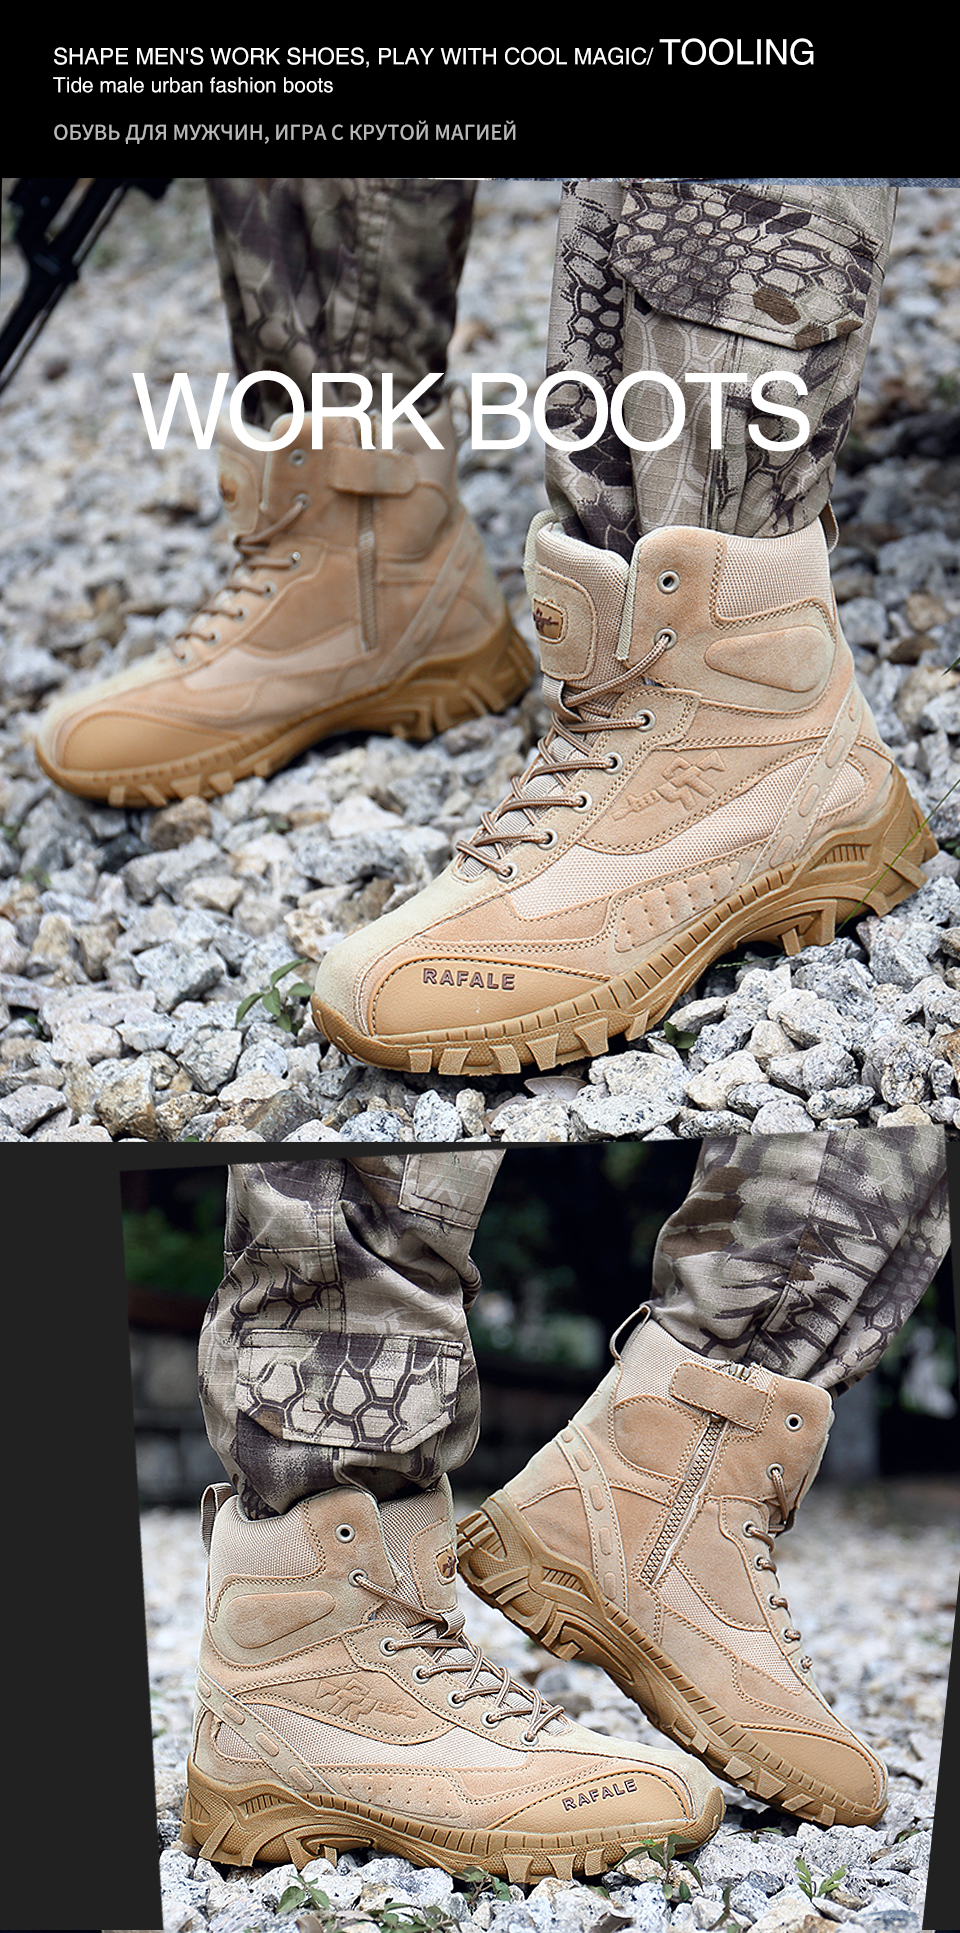 Winter Military Fashion Army Men' s Tactical Desert Combat High Top ...